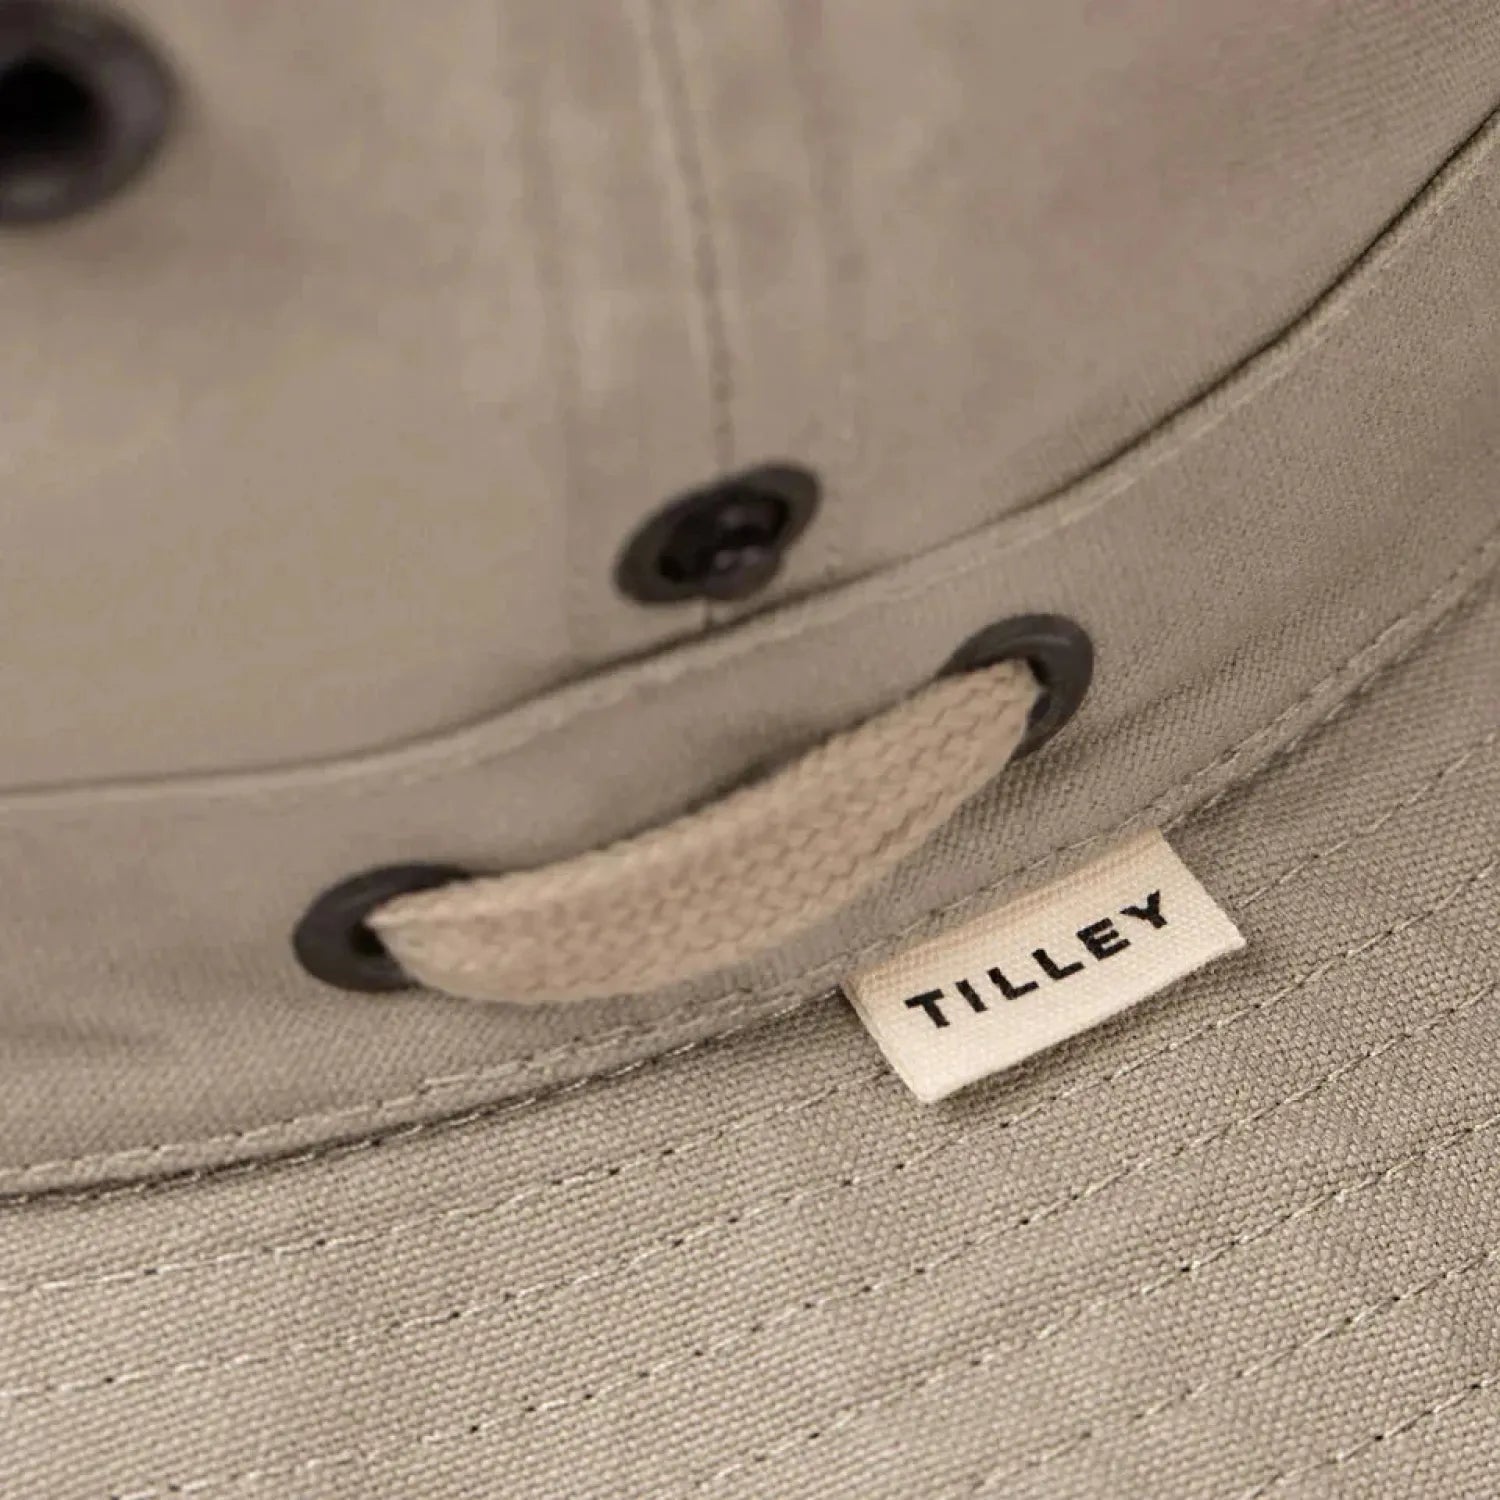 Tilley's T3 Wanderer Hat shown in Khaki color. Cream tag with black lettering.